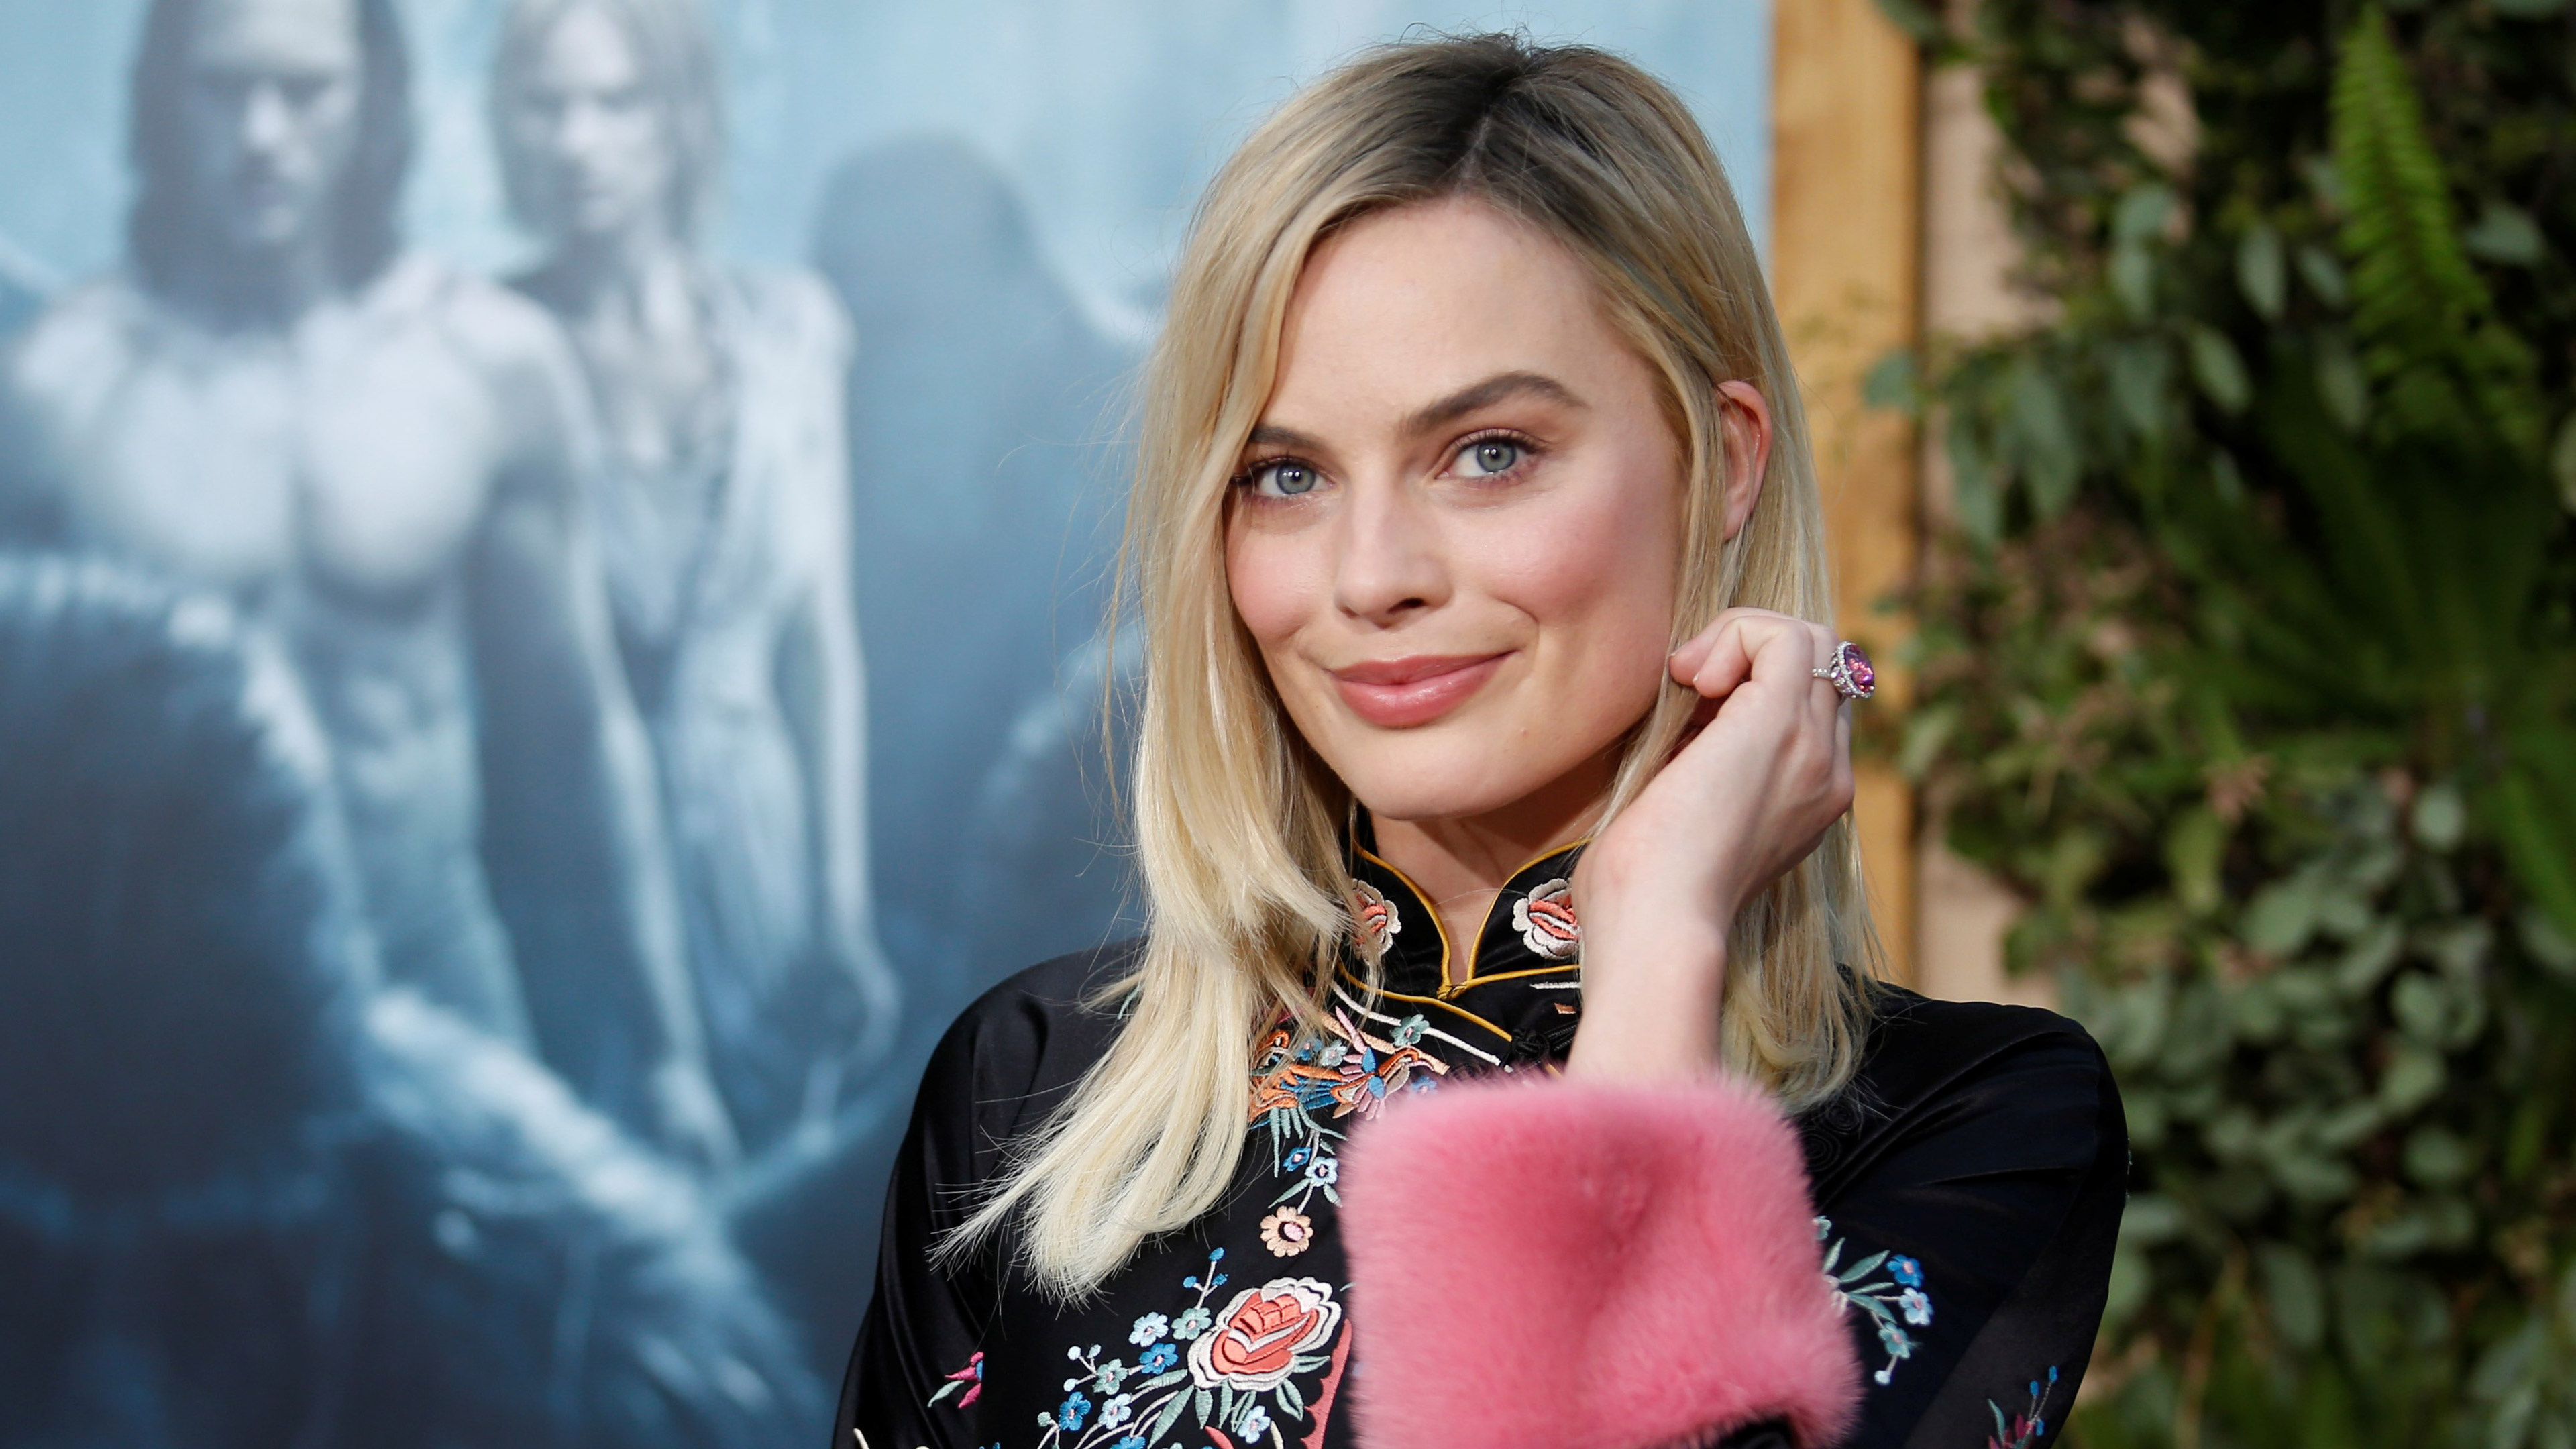 Margot Robbie: Known for starring in both high-profile, mainstream productions and low-budget independent films, in which she has been able to display both her dramatic and comedic range. 3840x2160 4K Wallpaper.